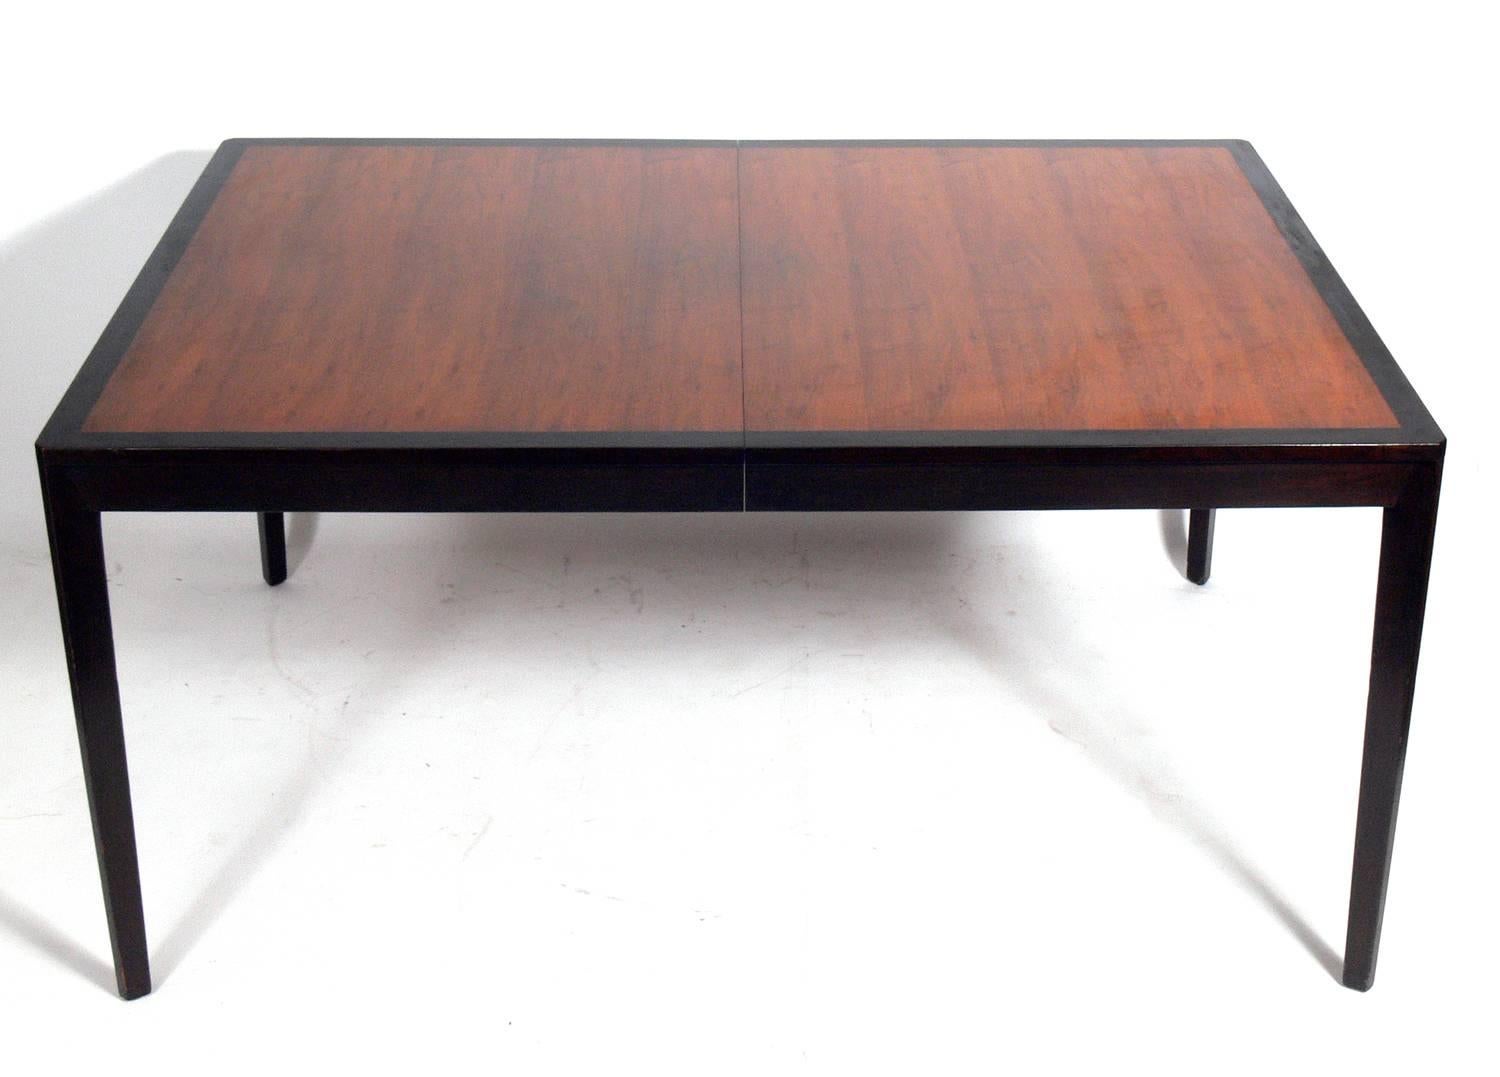 Clean lined dining table, designed by Edward Wormley for Dunbar, American, circa 1950s. Beautifully grained top. This piece is currently being refinished and can be completed in your choice of color.
Without any leaves, the table seats six guests